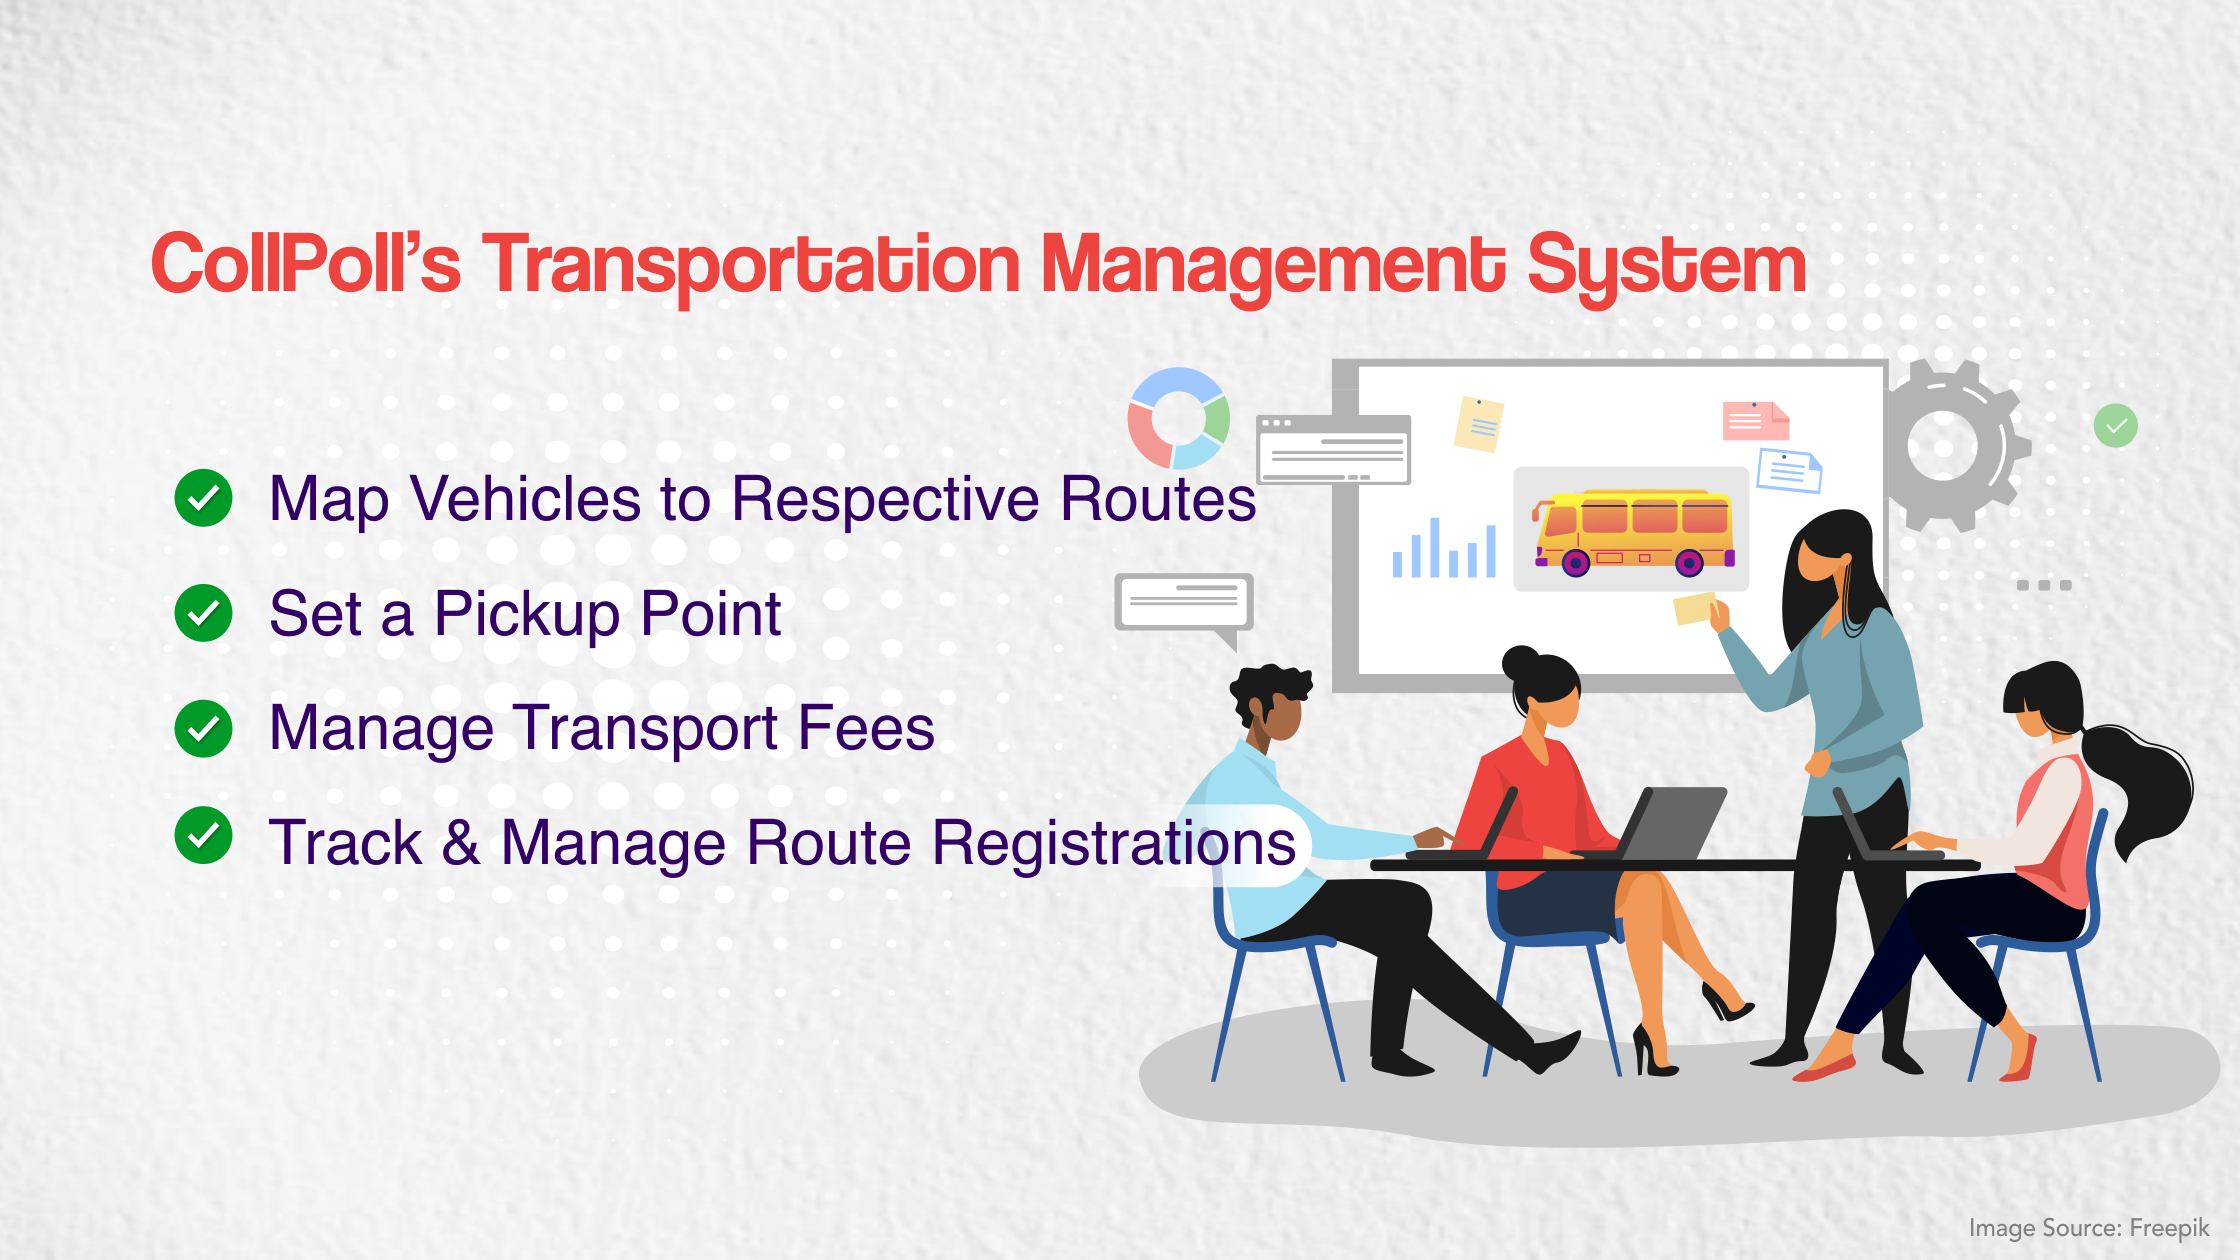 CollPoll’s Transportation Management System to enhance campus experience